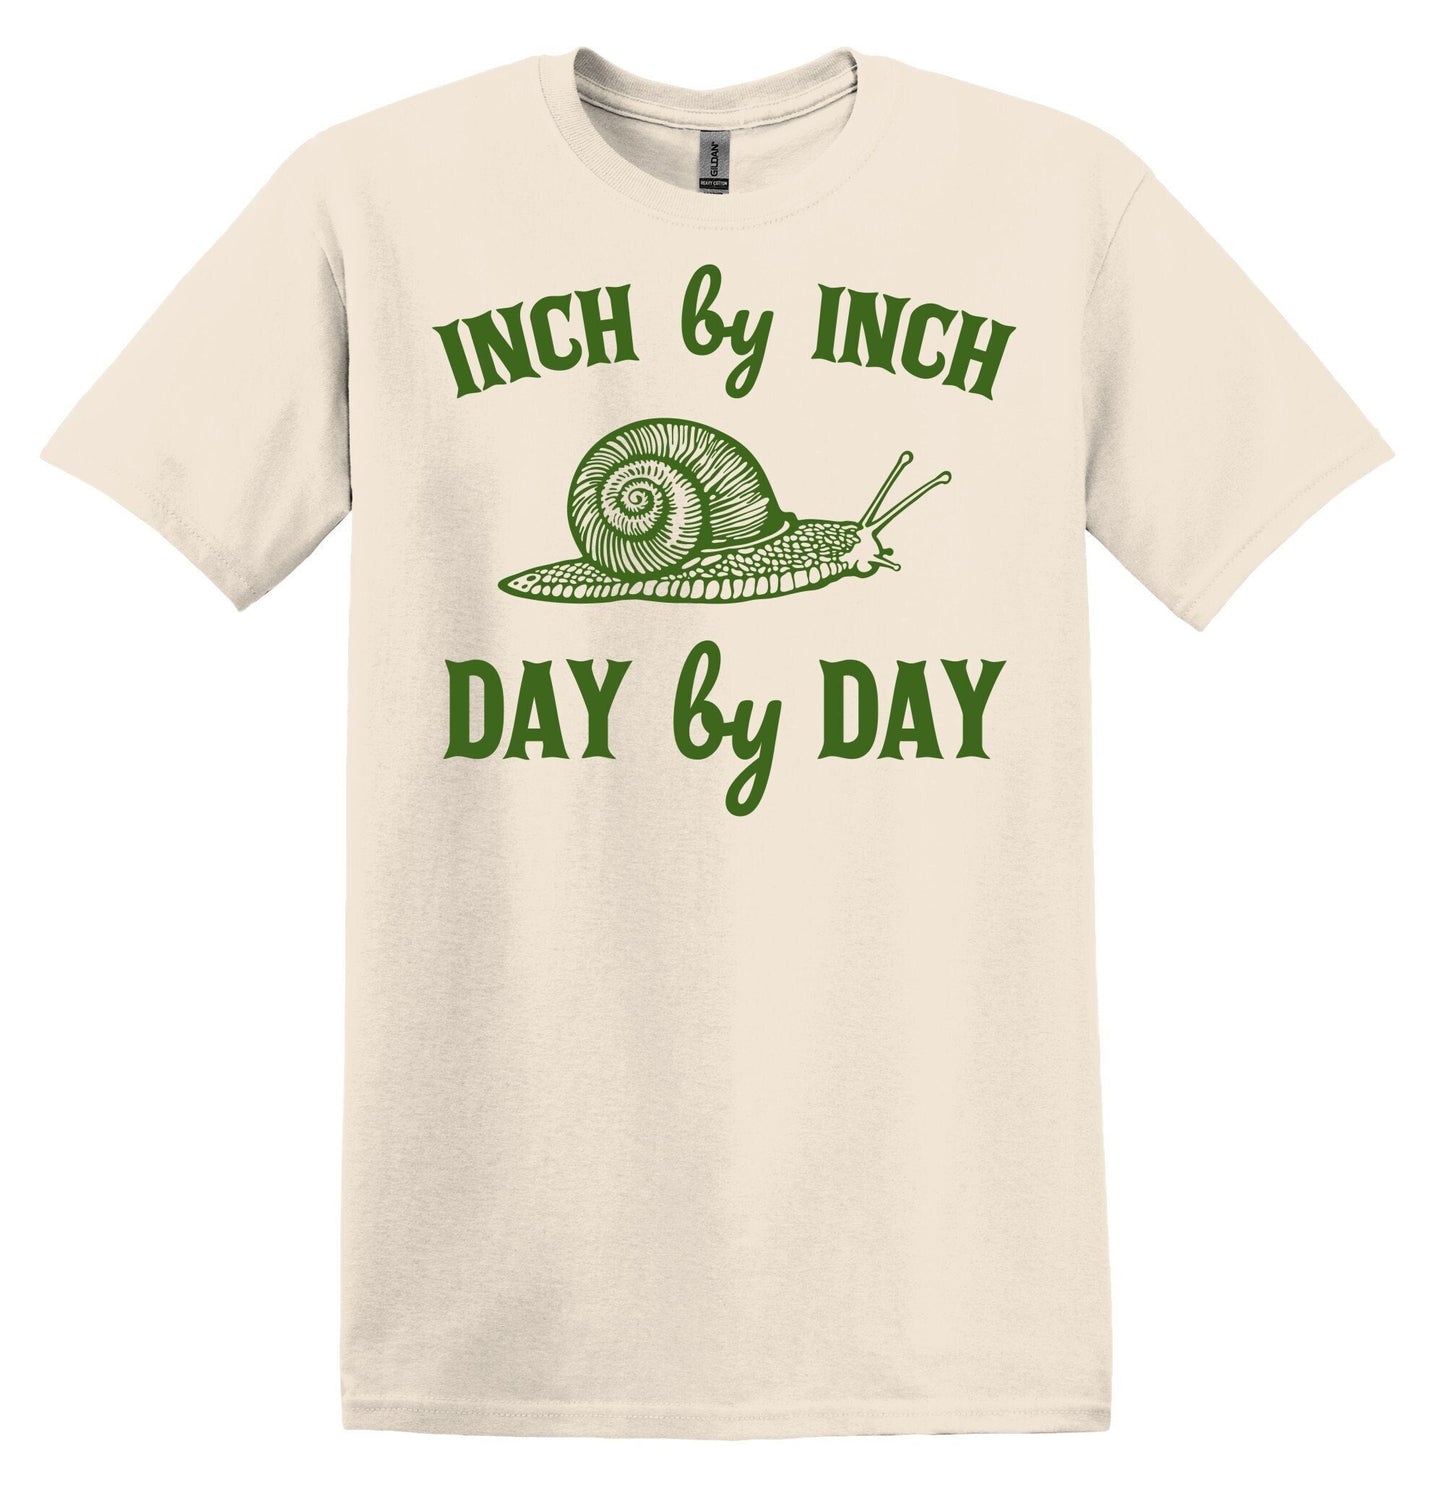 Inch by Inch Day By Day Snail Shirt Graphic Shirt Funny Vintage Adult Funny Shirt Nostalgia Shirt Cotton Shirt Minimalist Shirt